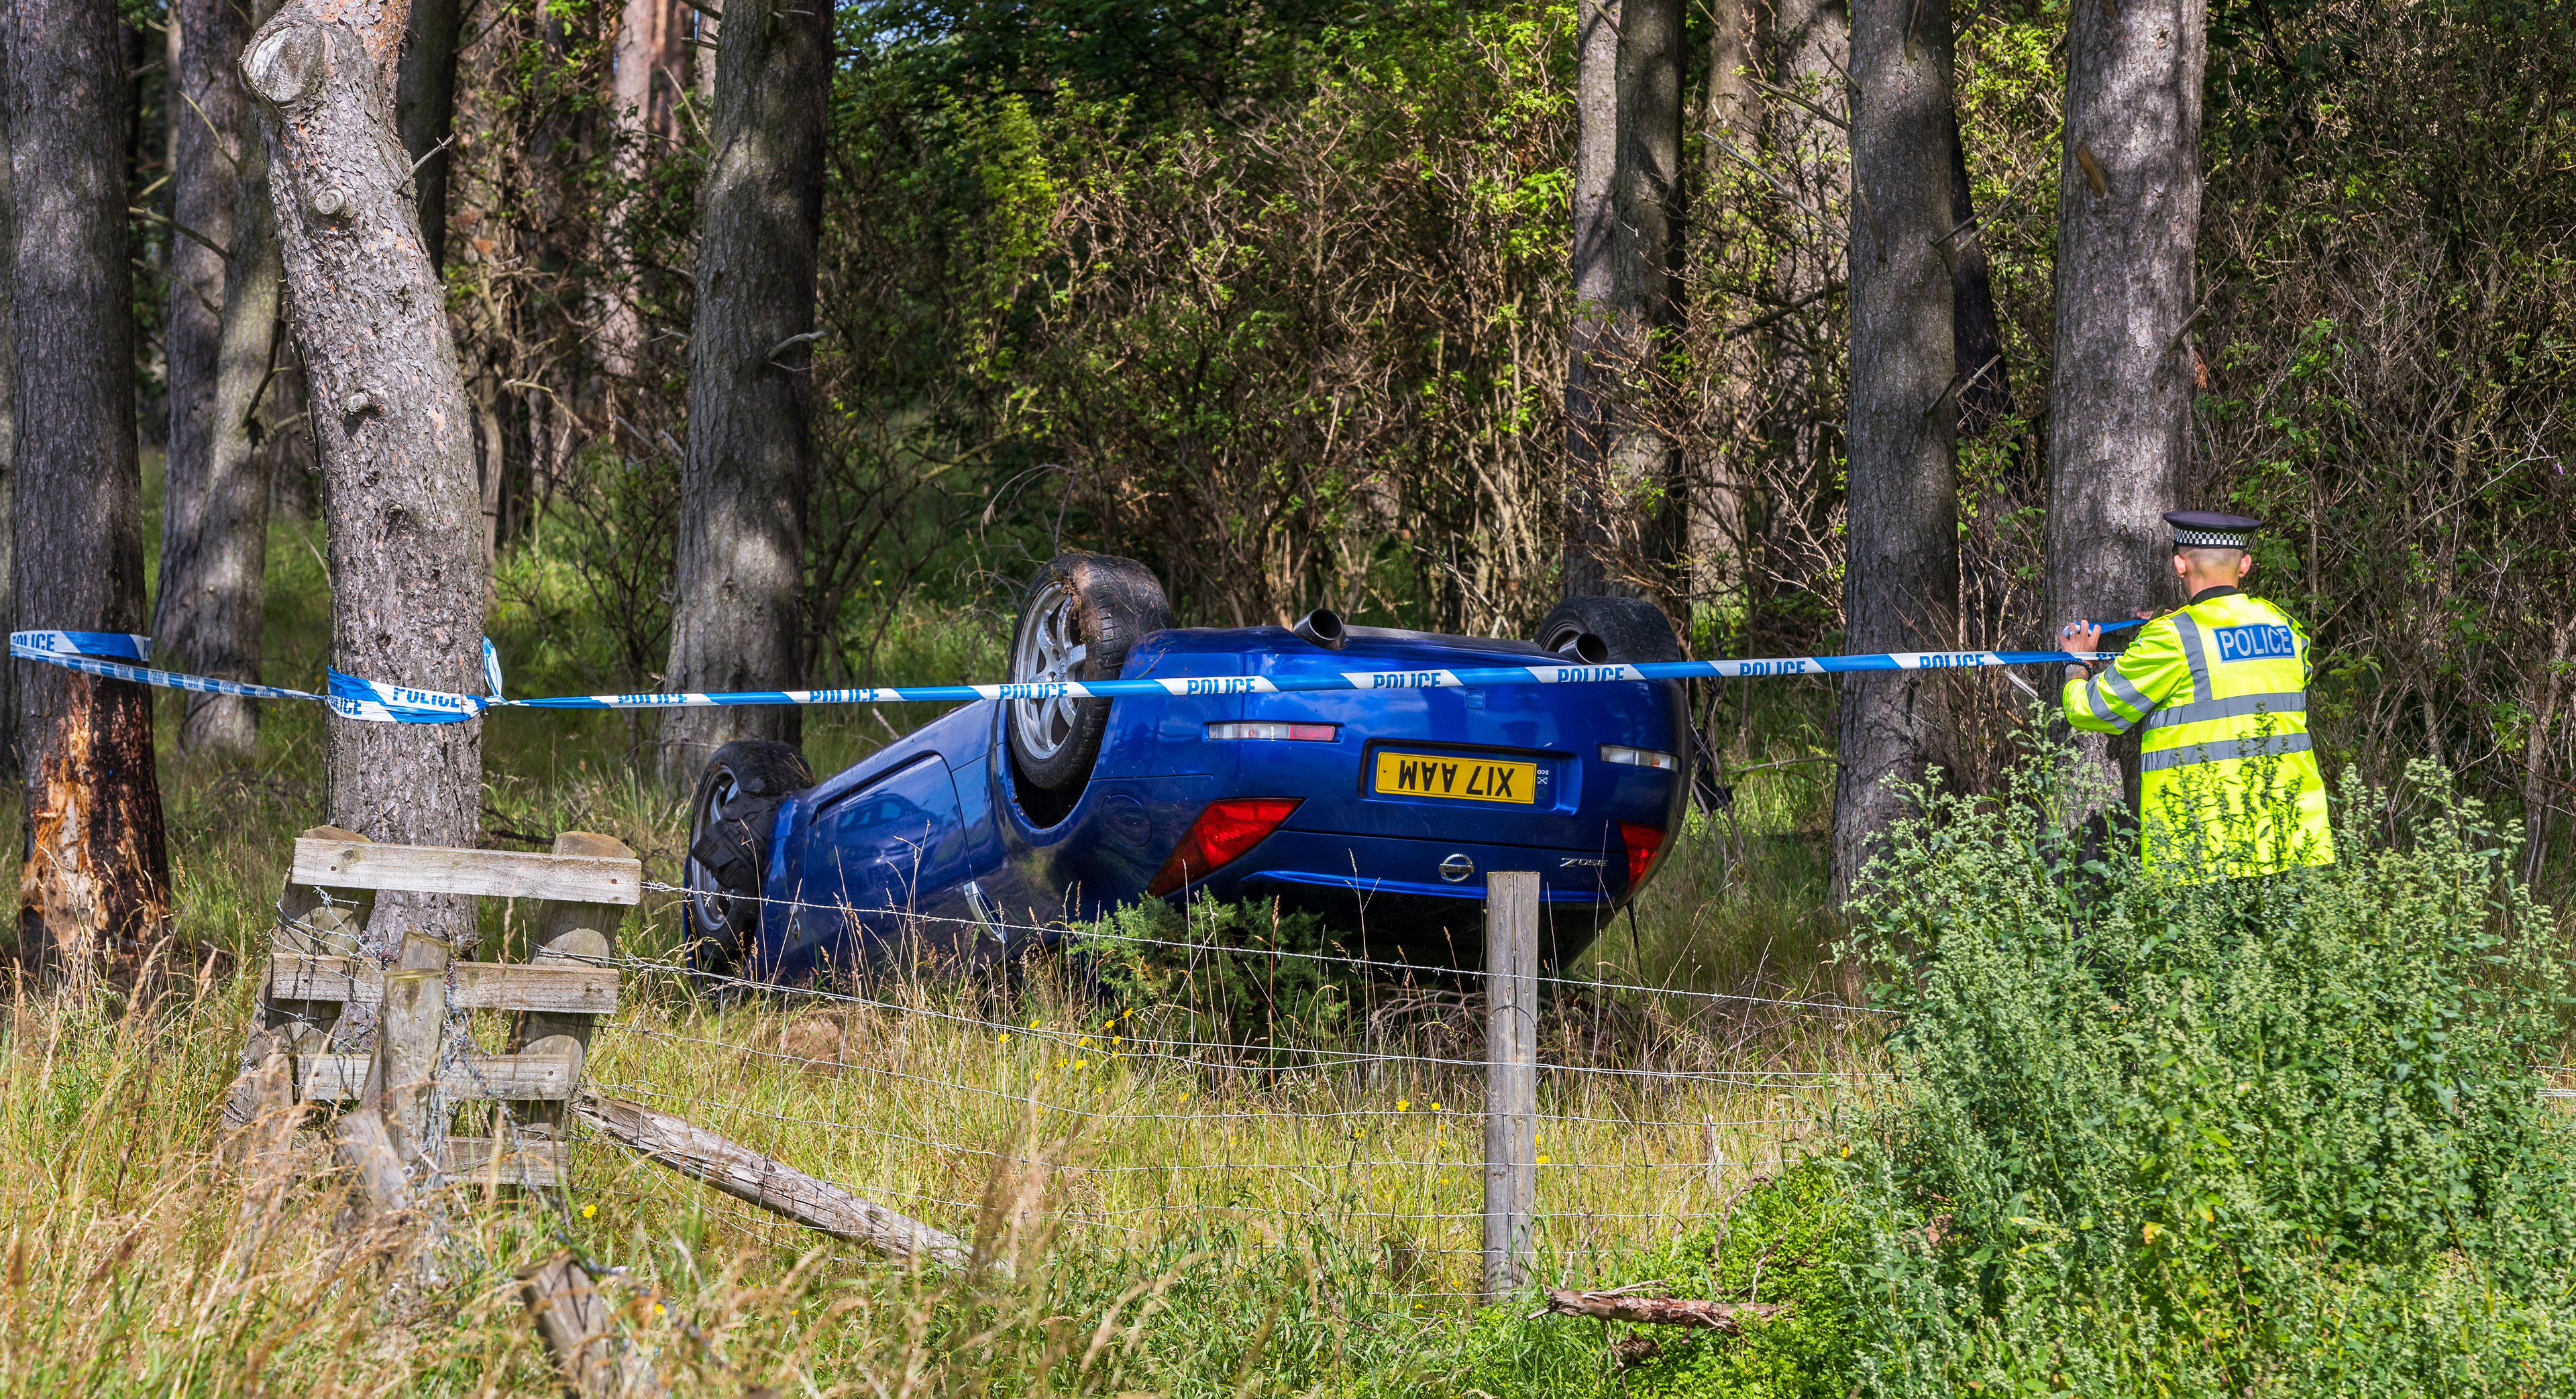 The Blue Nissan 350Z which had been travelling towards Lossiemouth on the A941 when it lost control on a right hand bend, crossed road, hit verge and tree and overturned onto its roof. The male driver was uninjured.